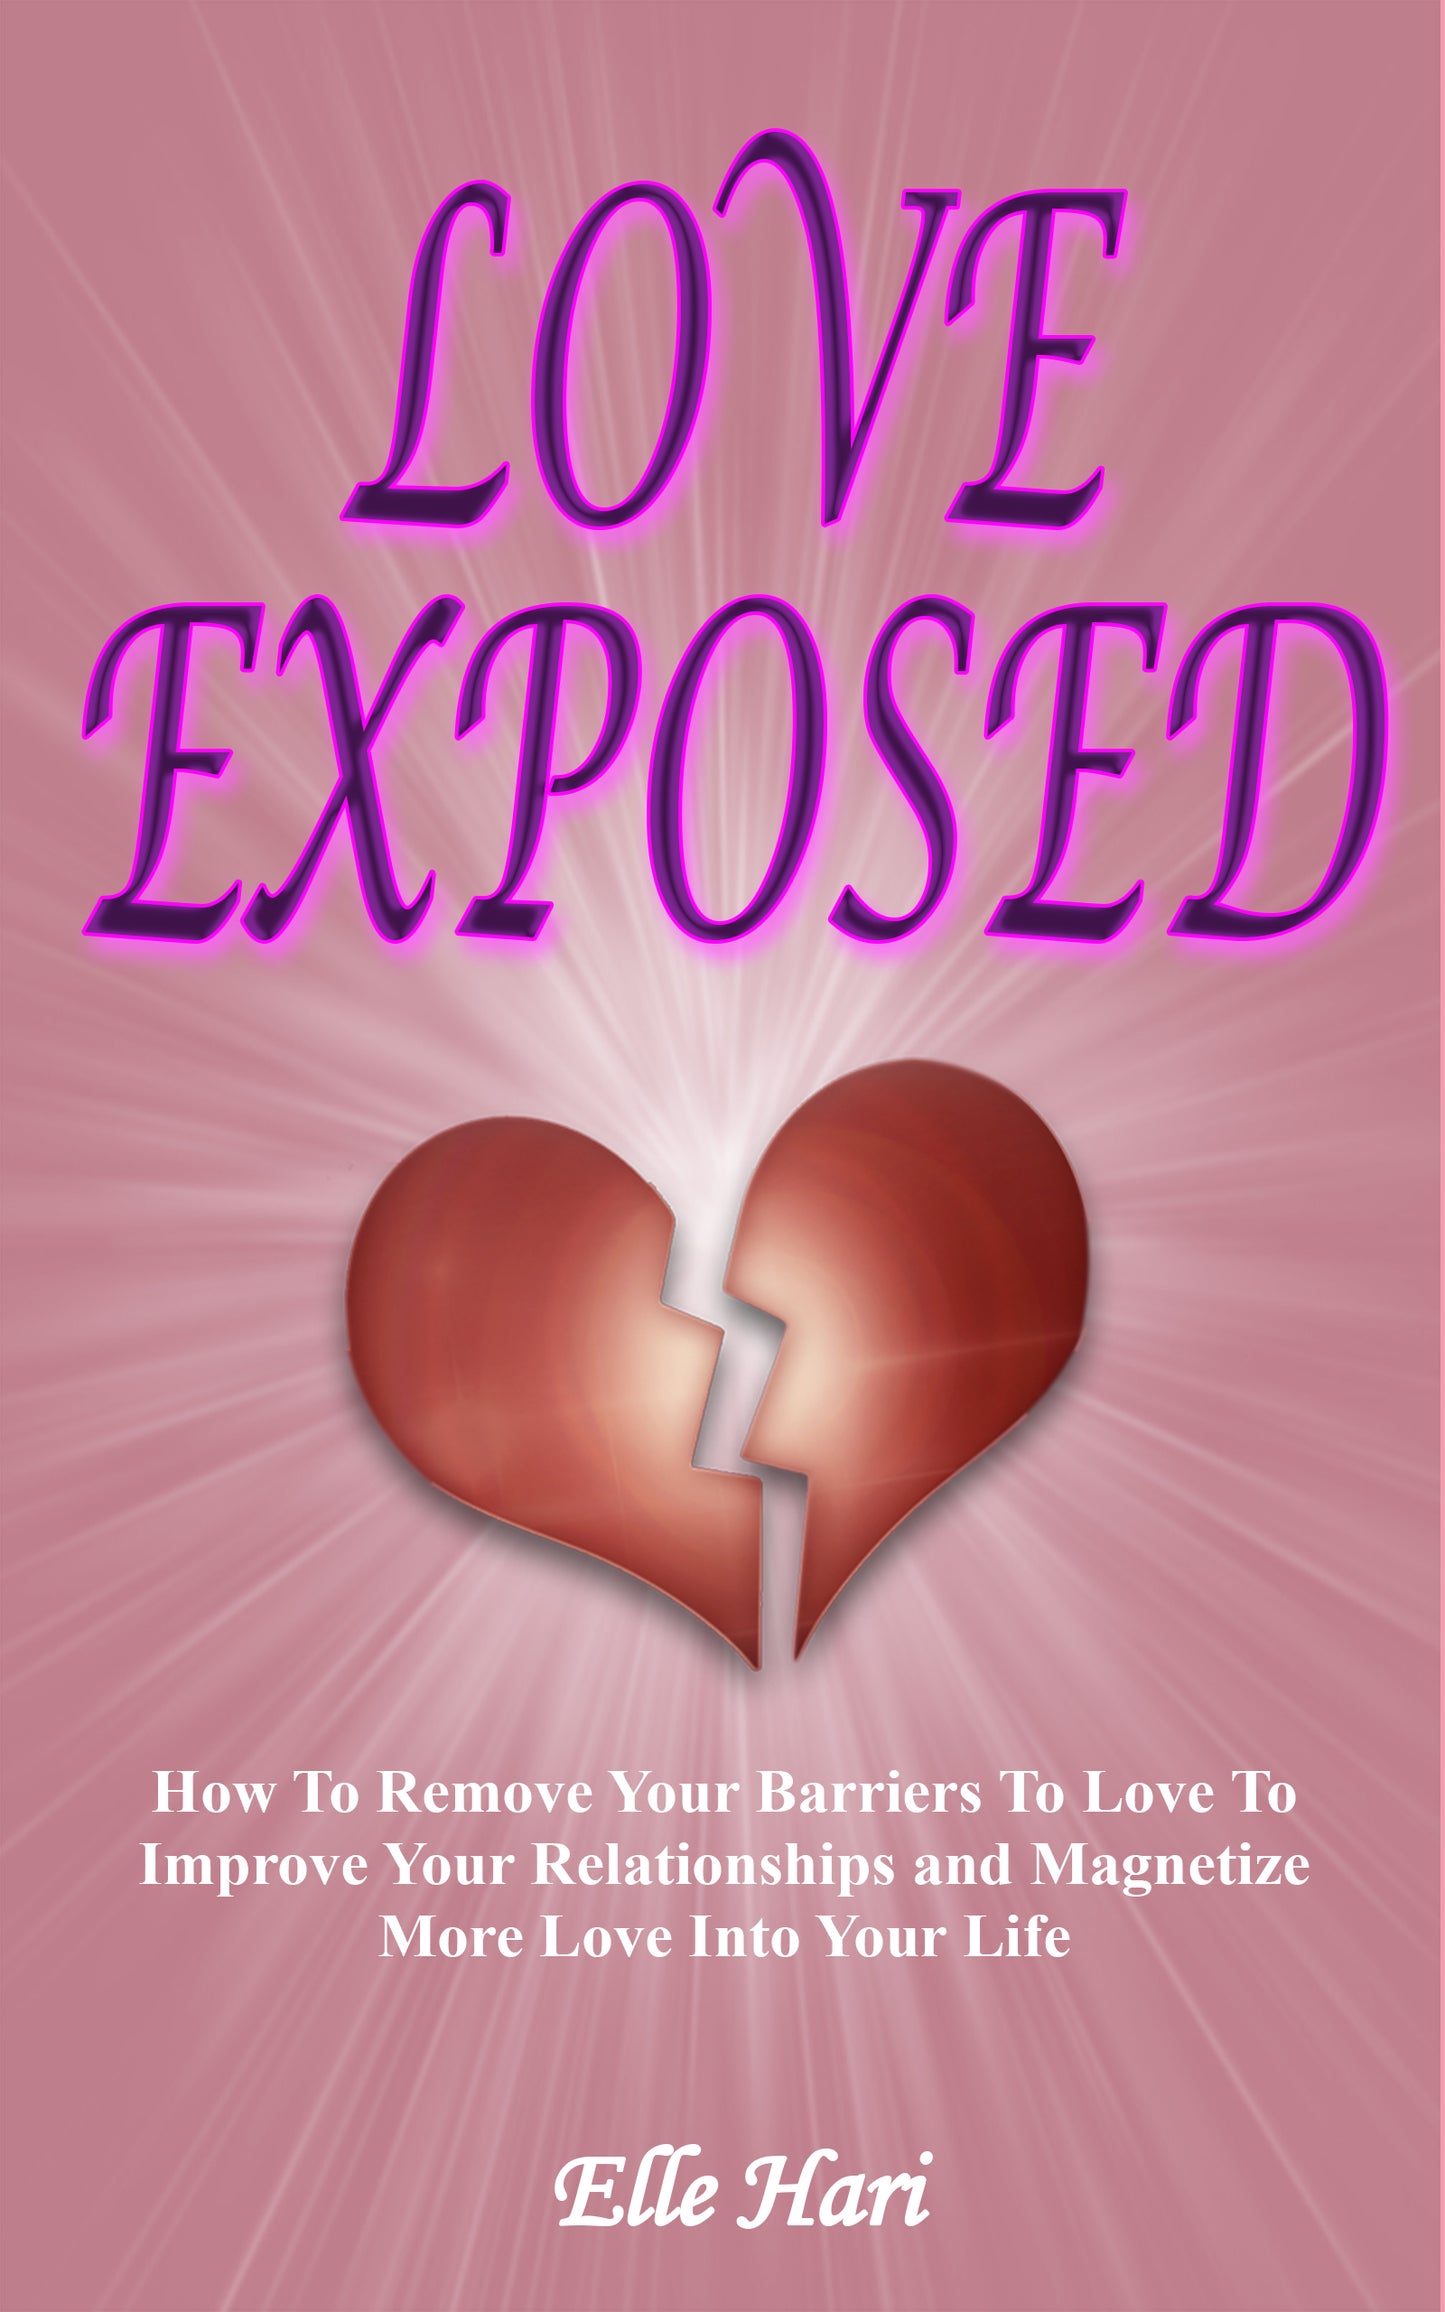 Love Exposed: How to Remove Your Barriers to Love to Improve Your Relationships and Magnetize More Love Into Your Life (Kindle & ePub)